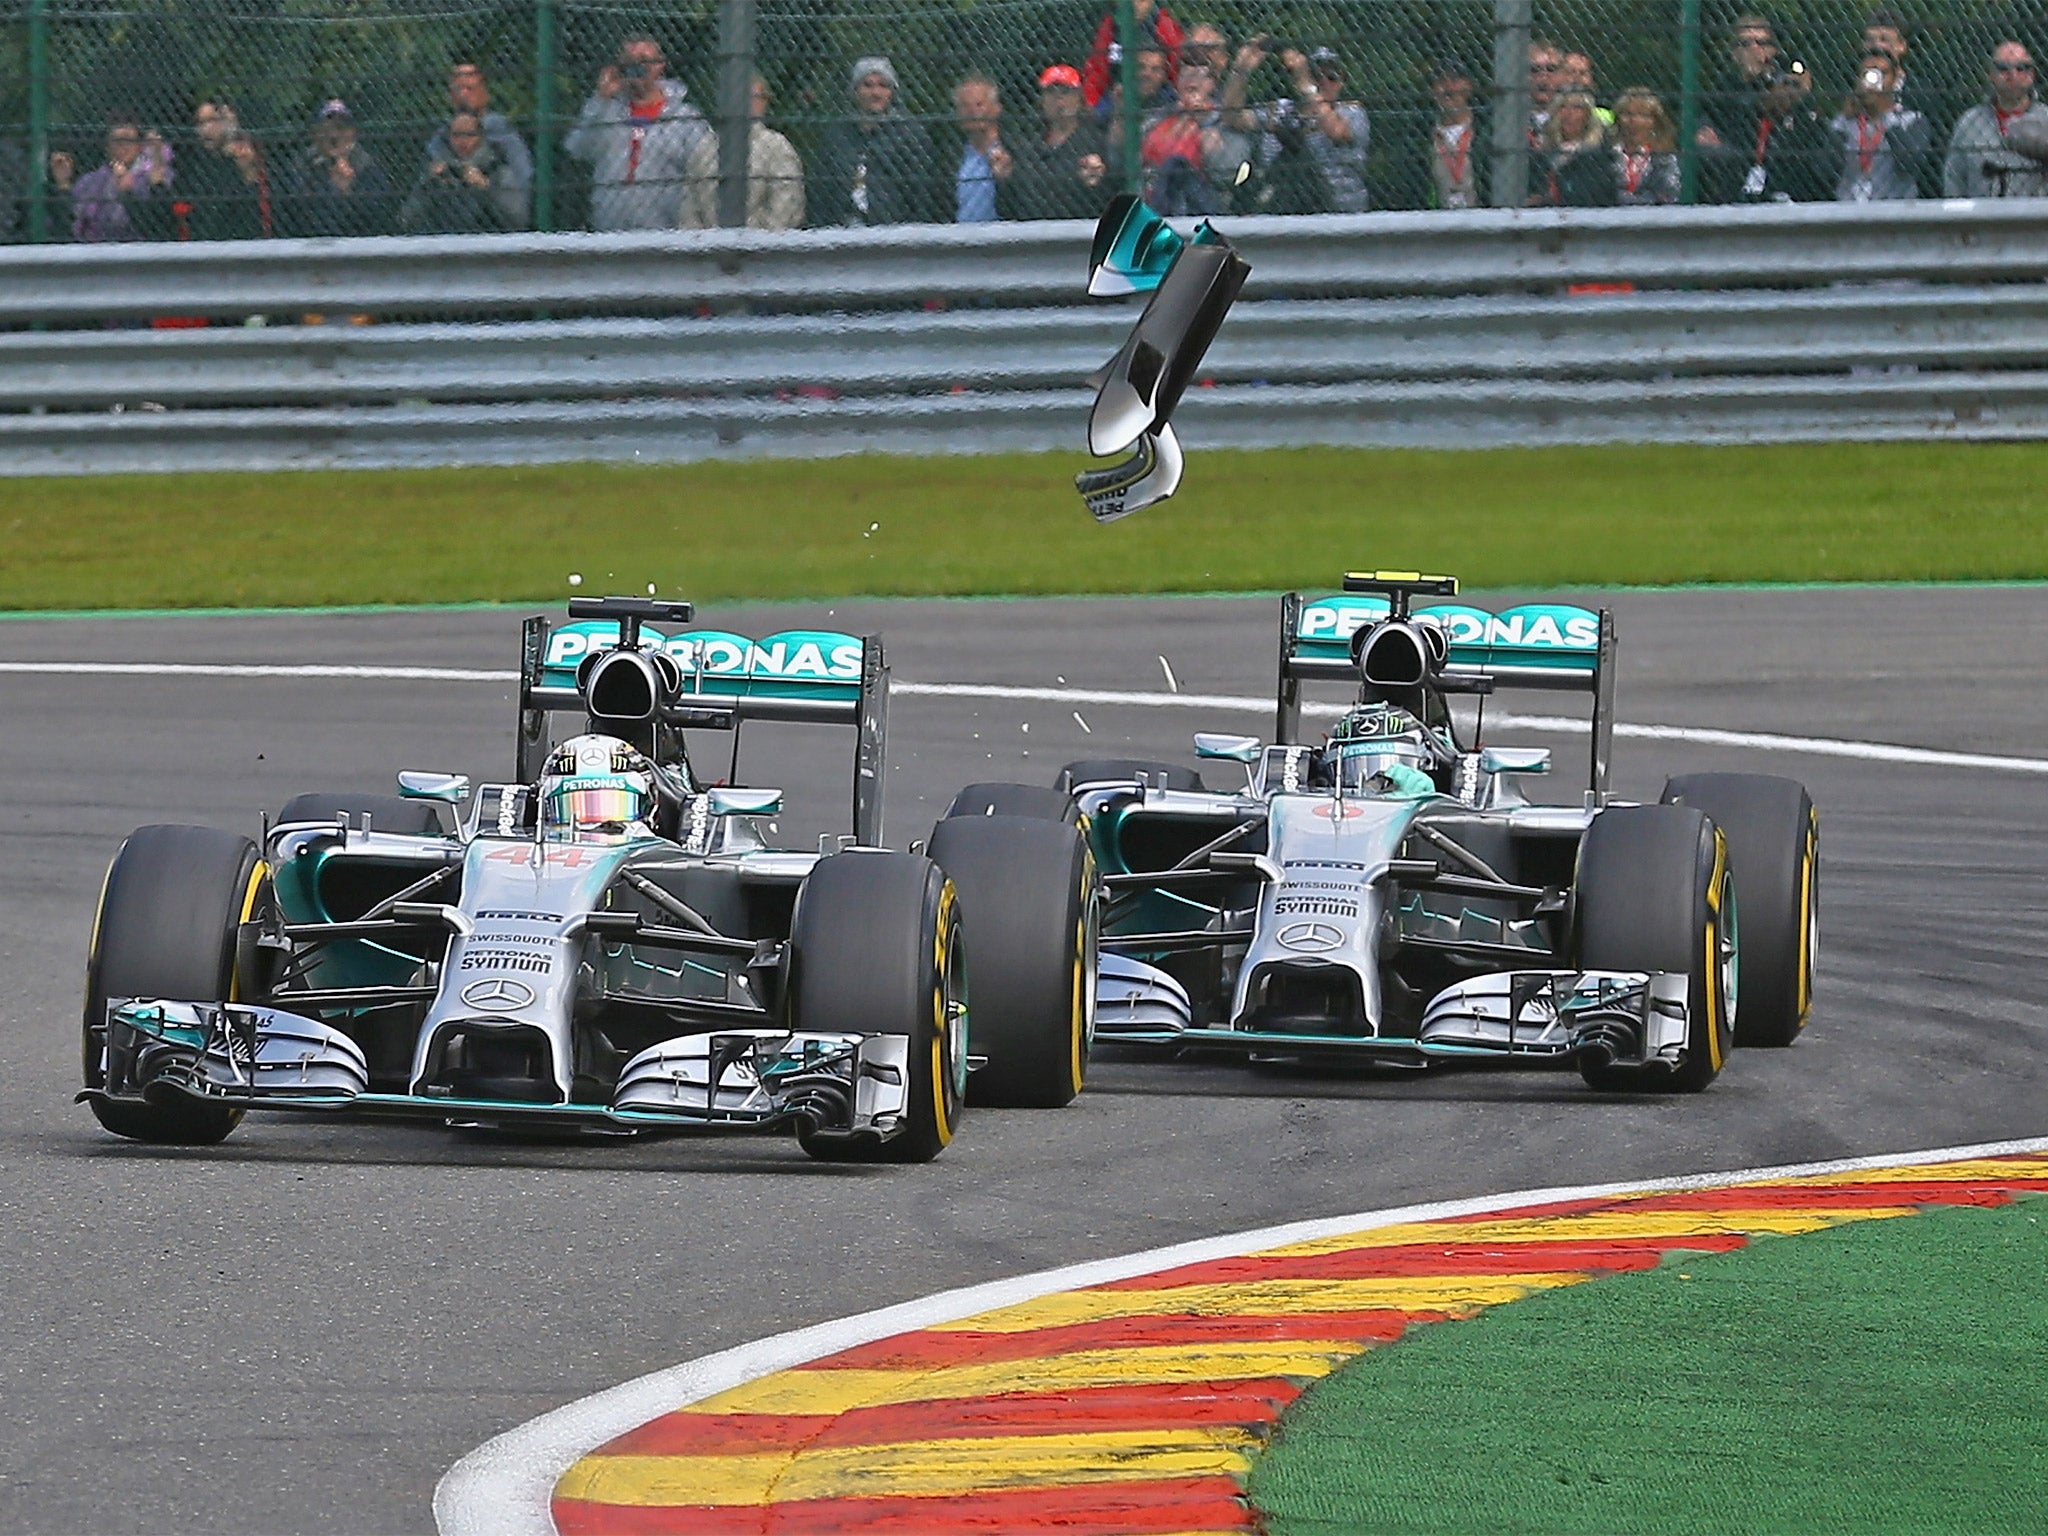 Debris flies from the car of Lewis Hamilton (left) after a collision with his Mercedes team-mate Nico Rosberg which led to the British driver’s retirement during Sunday’s Belgian GP